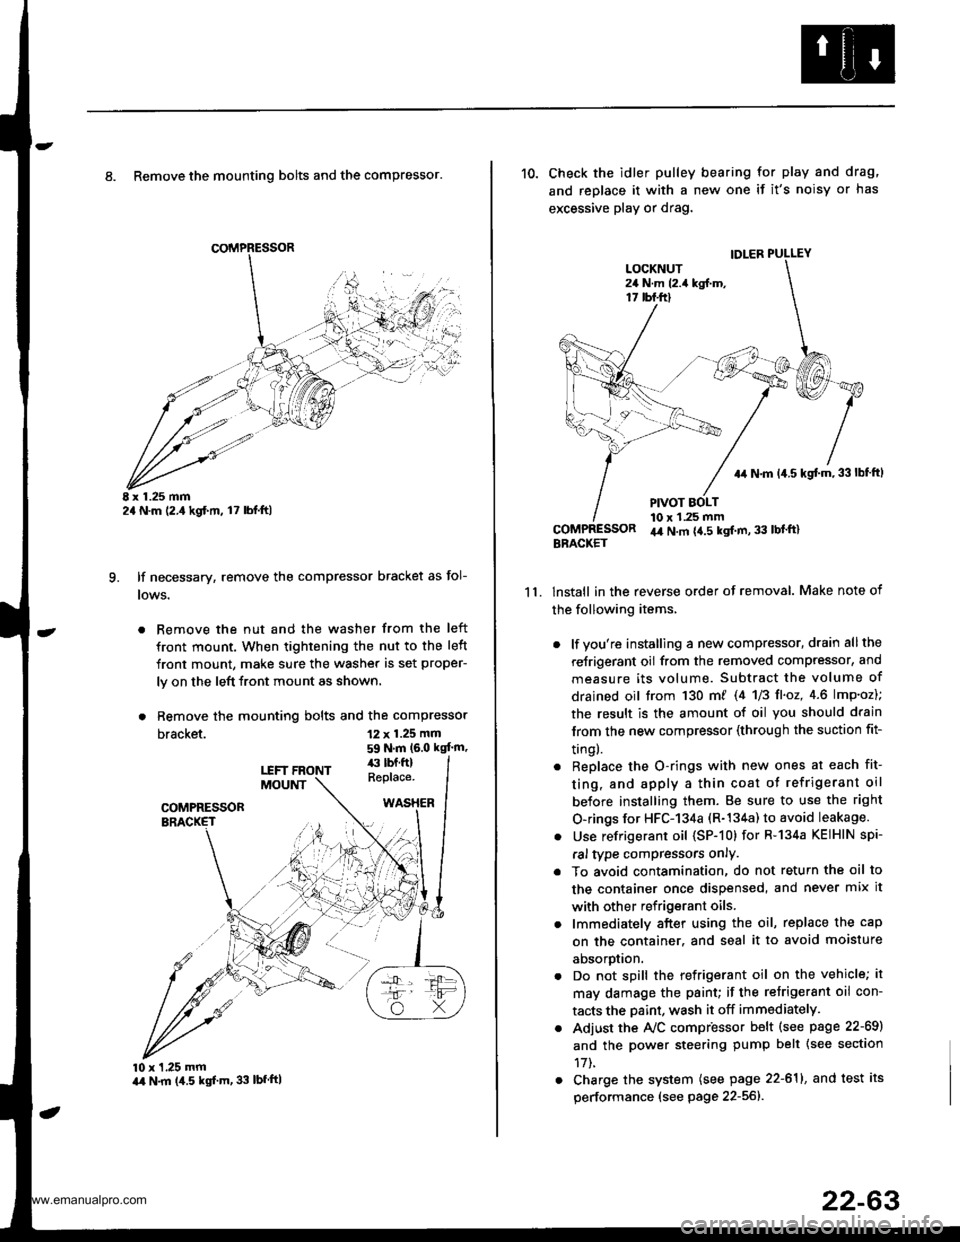 HONDA CR-V 1997 RD1-RD3 / 1.G Workshop Manual 
8. Remove the mounting bolts and the compressor.
E x 1.25 mm2a N.m (2.,1kgf.m, l7 lbl.ft)
lf necessary, remove the compressor bracket as fol-
lows.
. Remove the nut and the washer from the left
front